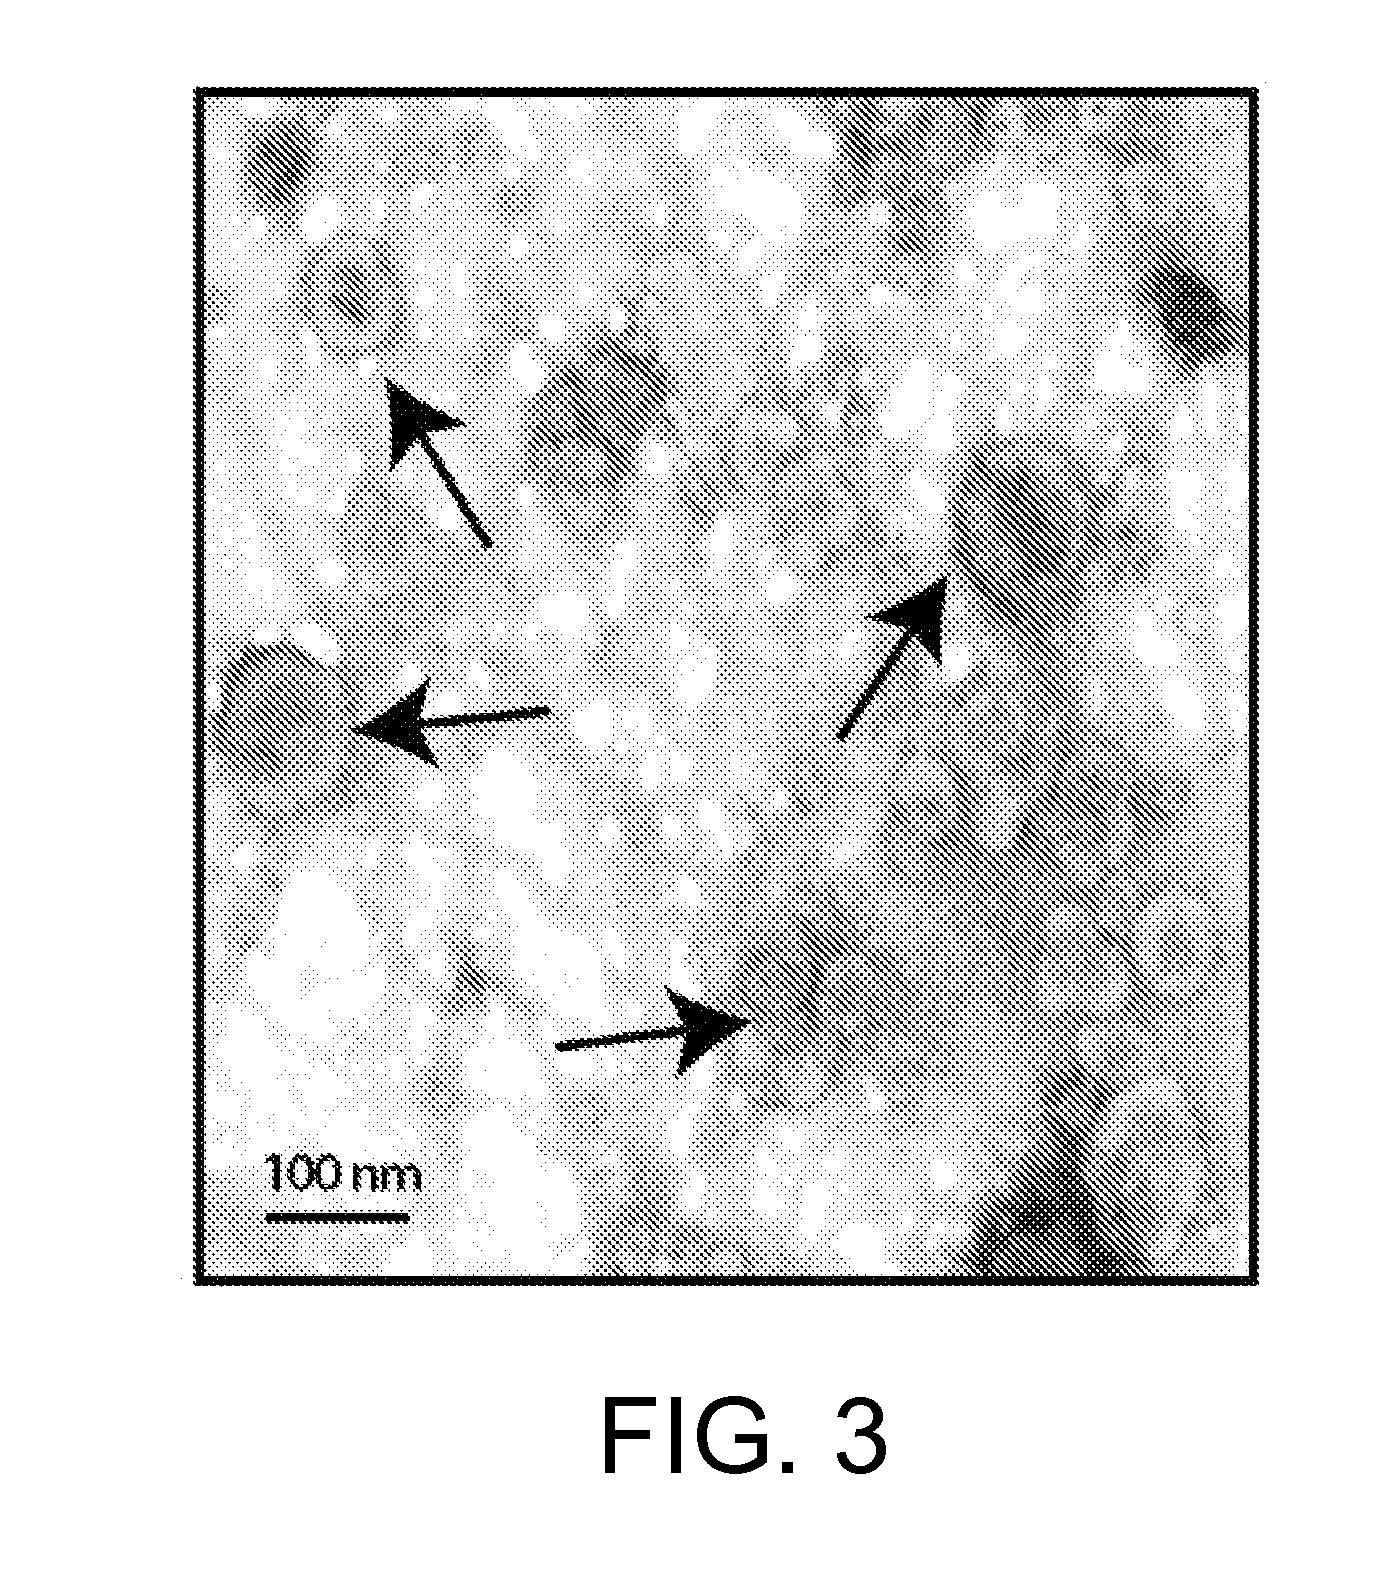 Methods for microvesicle isolation and selective removal